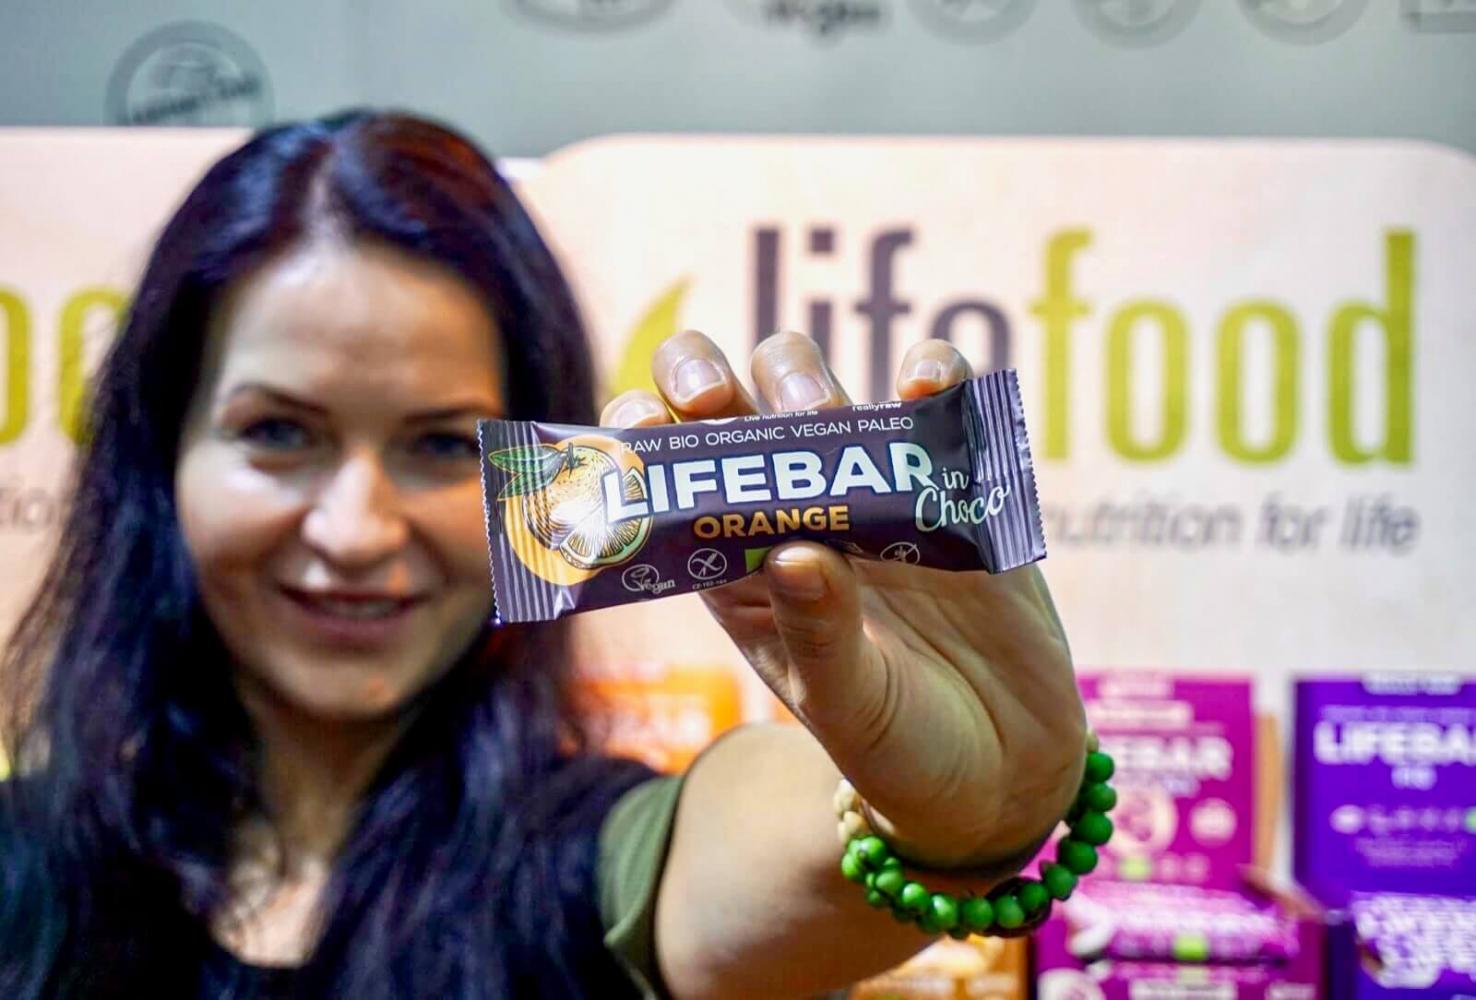 Lifefood owner Tereza is showing a new product - Lifebar coated with chocolated